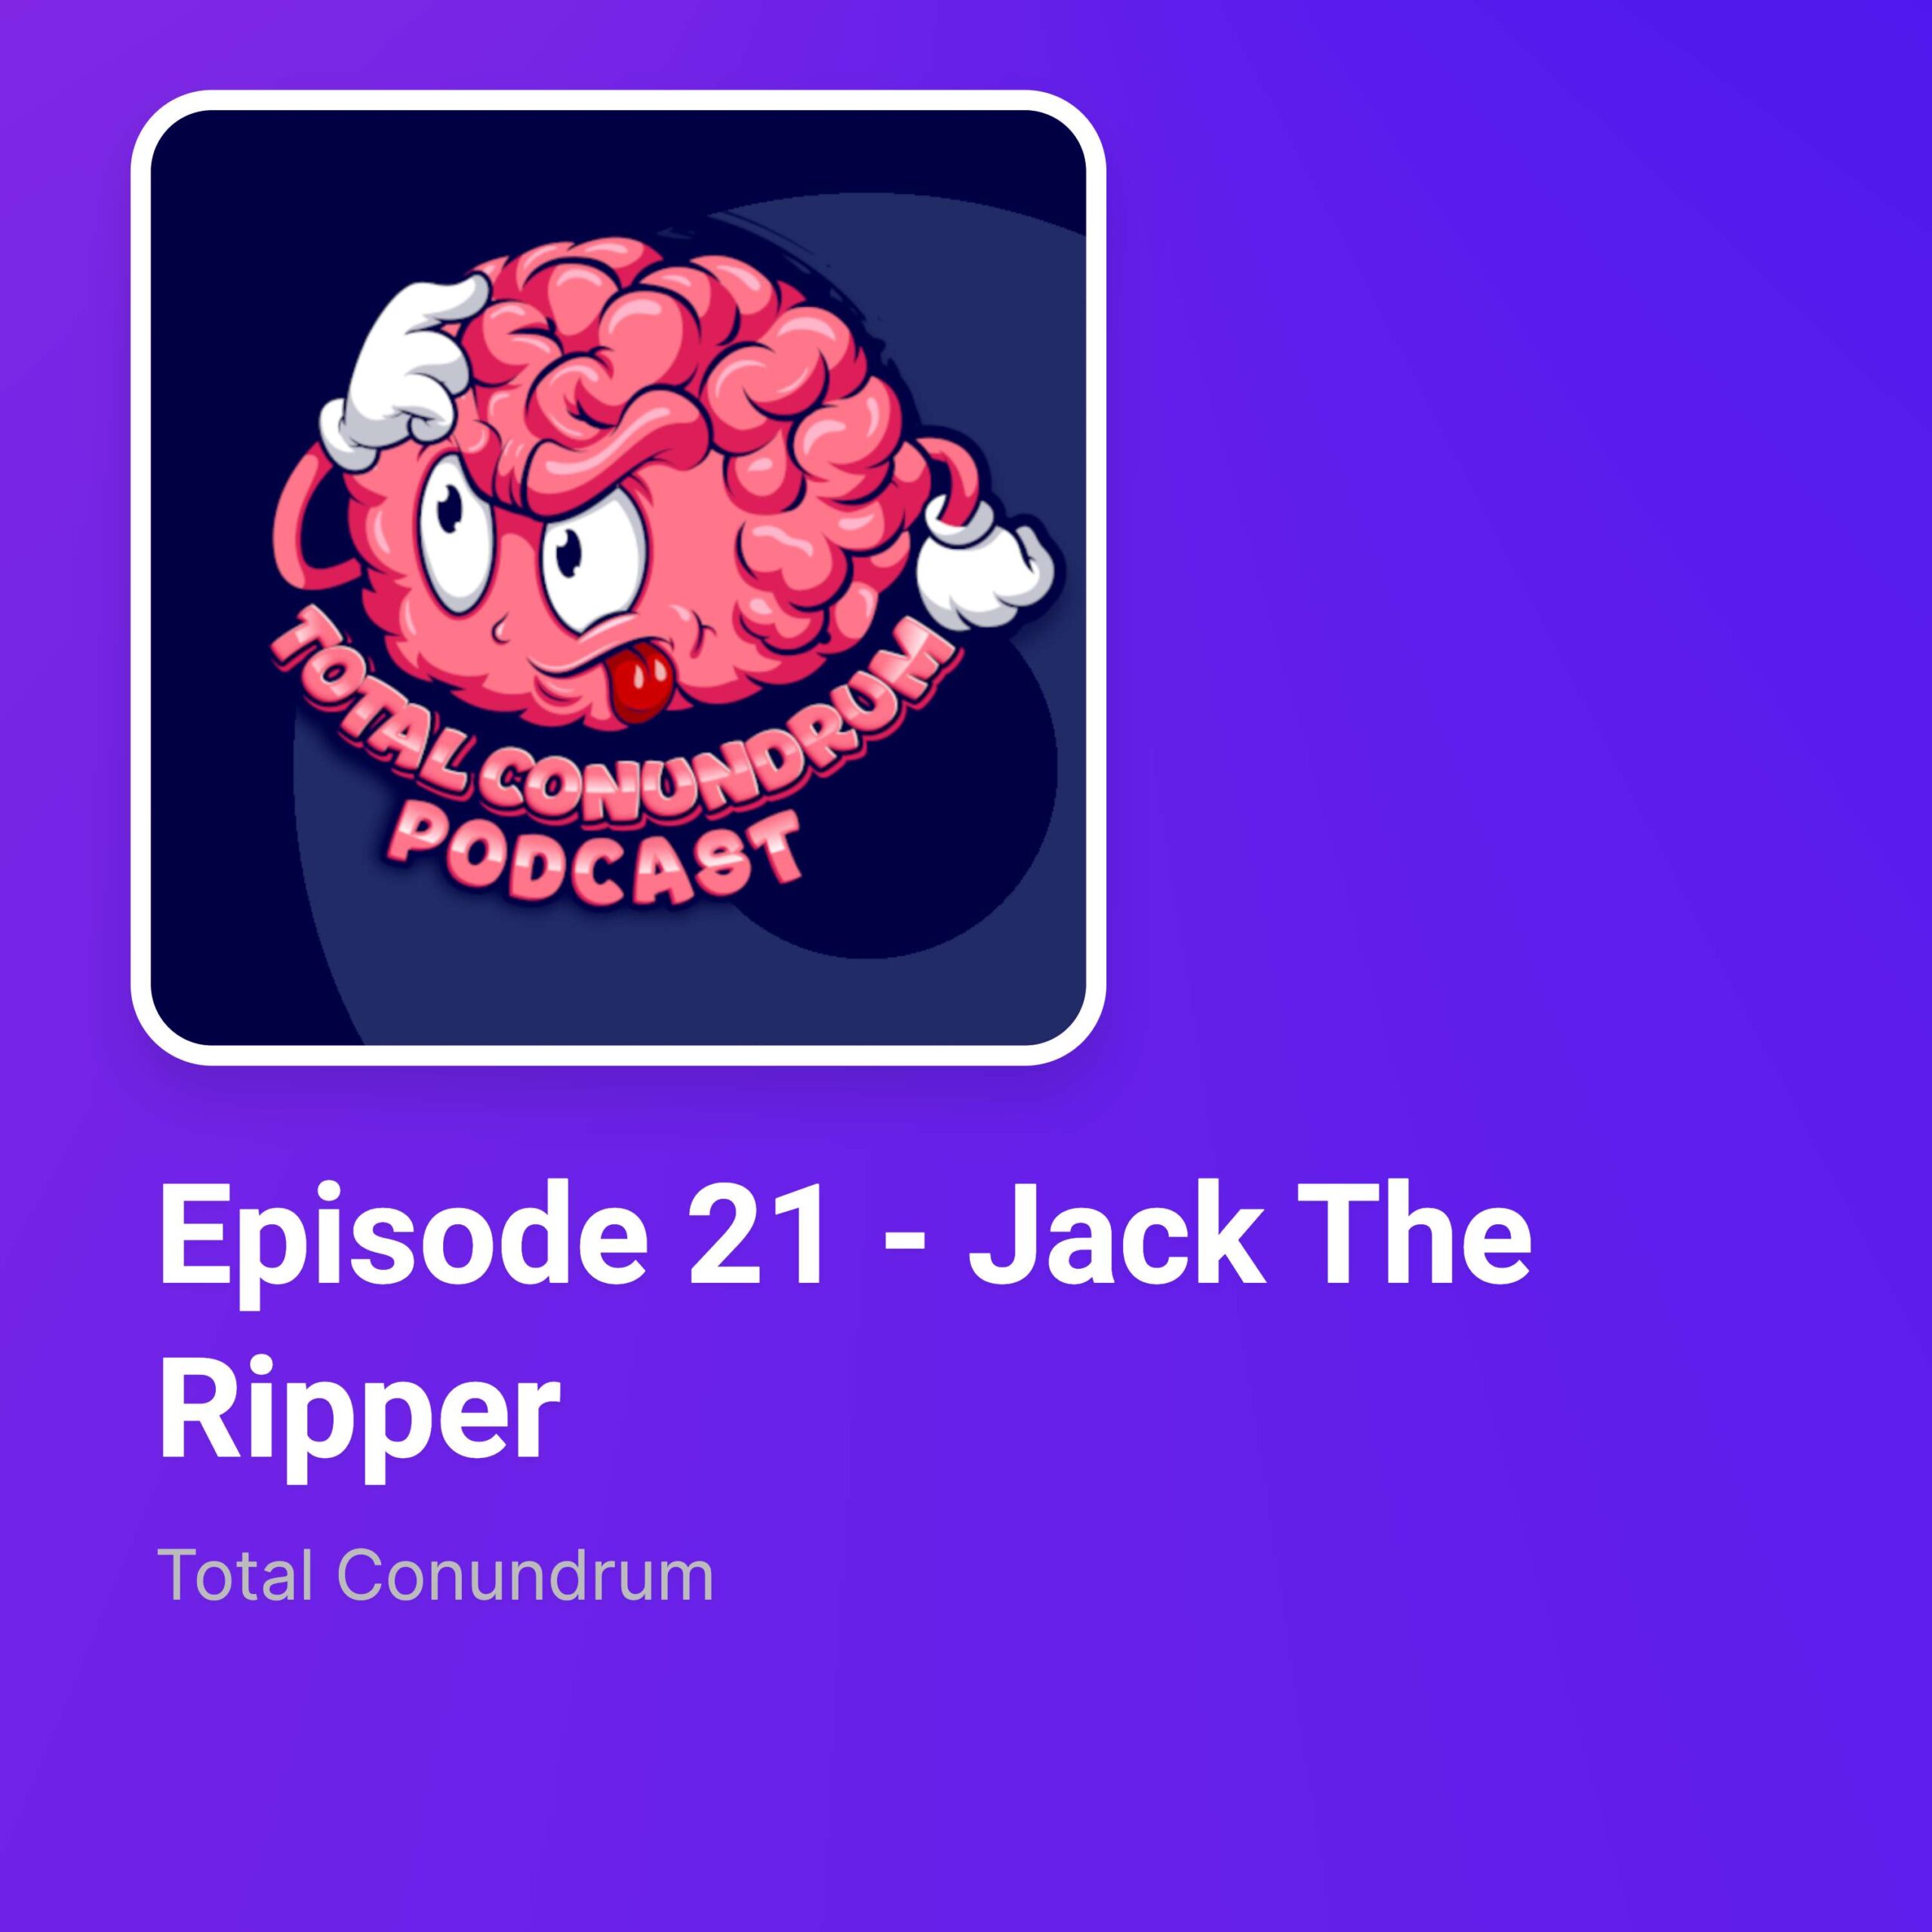 Episode 21 - Jack The Ripper